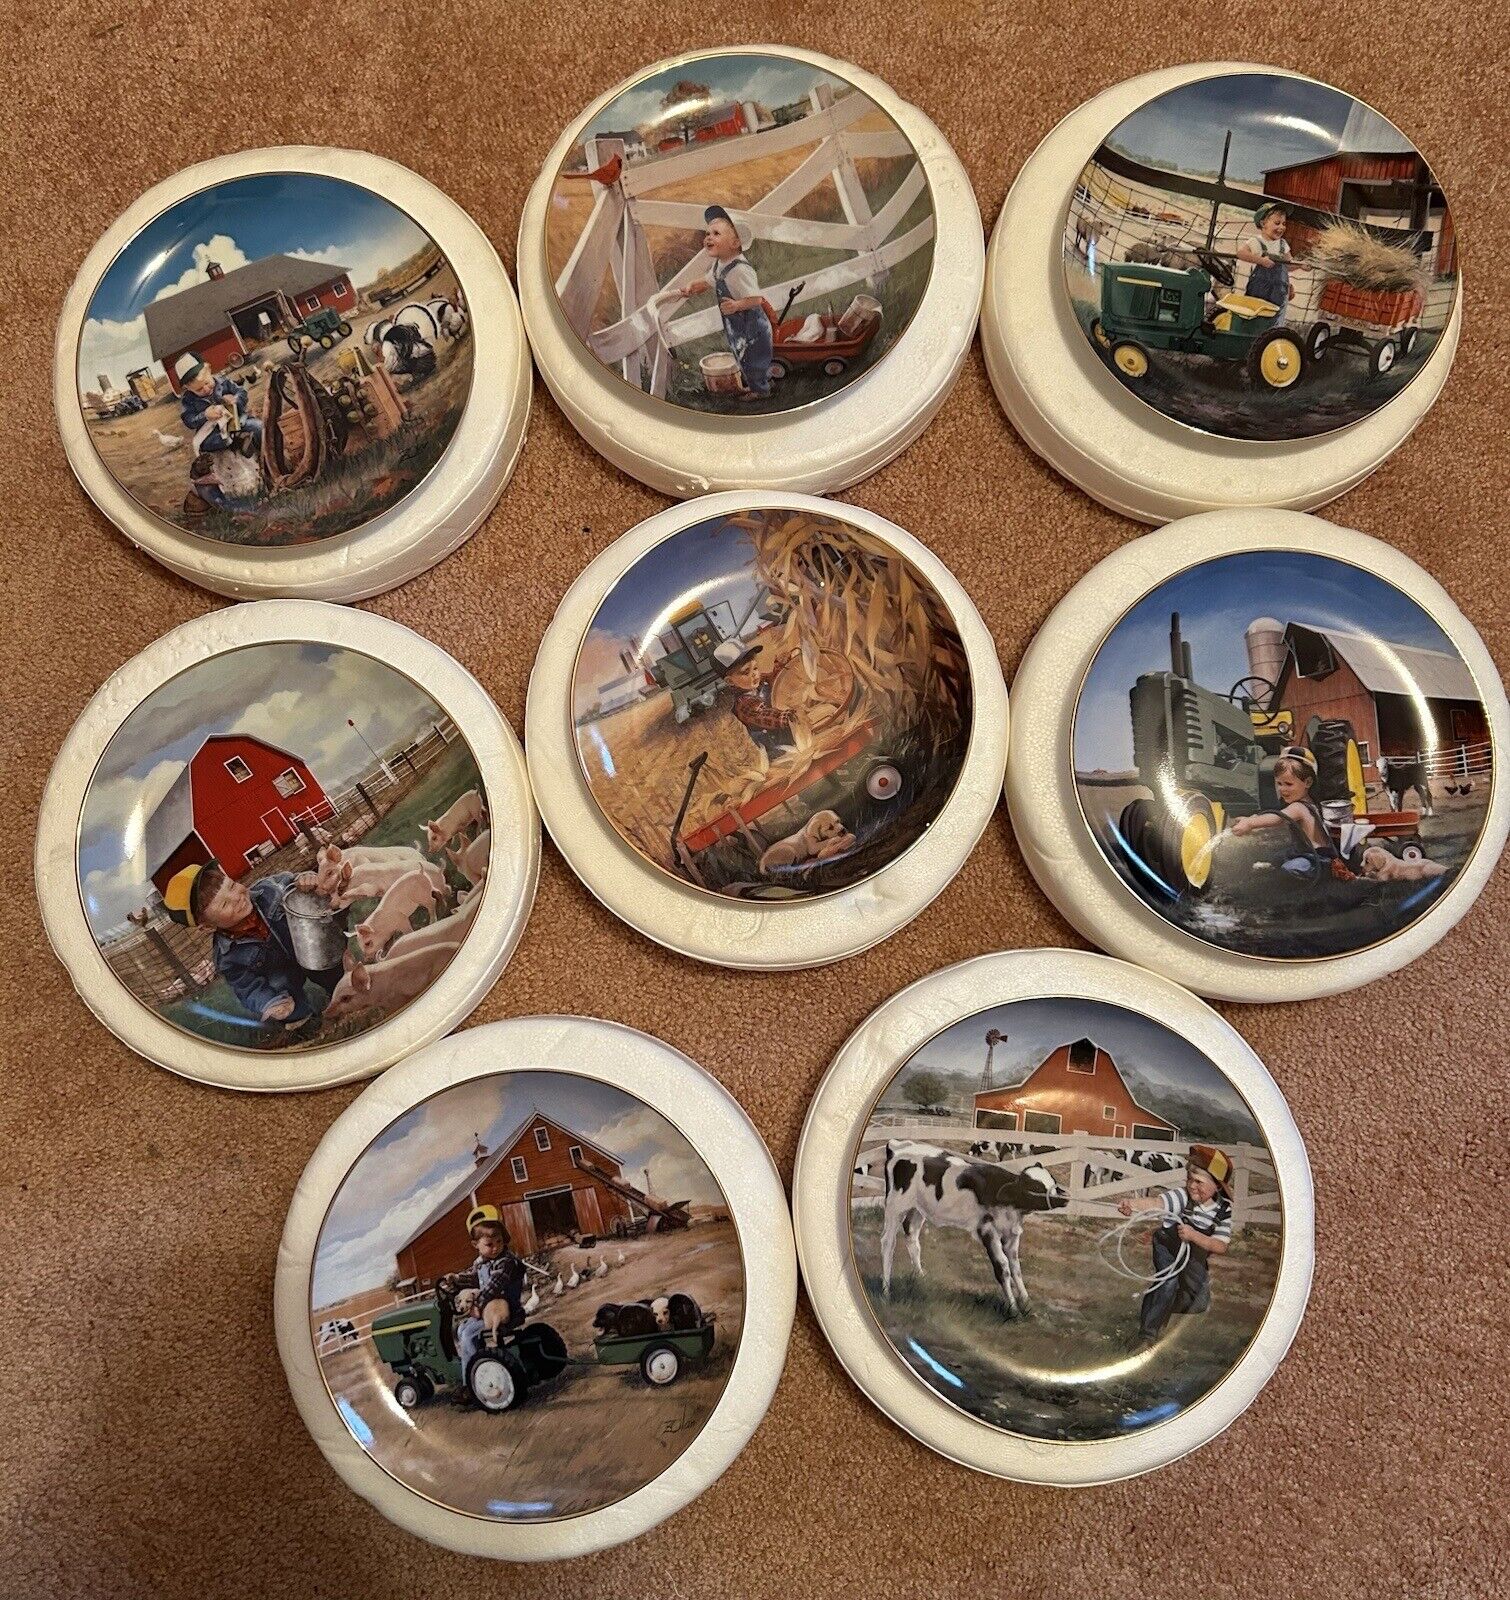 Little Farmhands, limited edition plates, by Donald Zolan (complete set of 8)